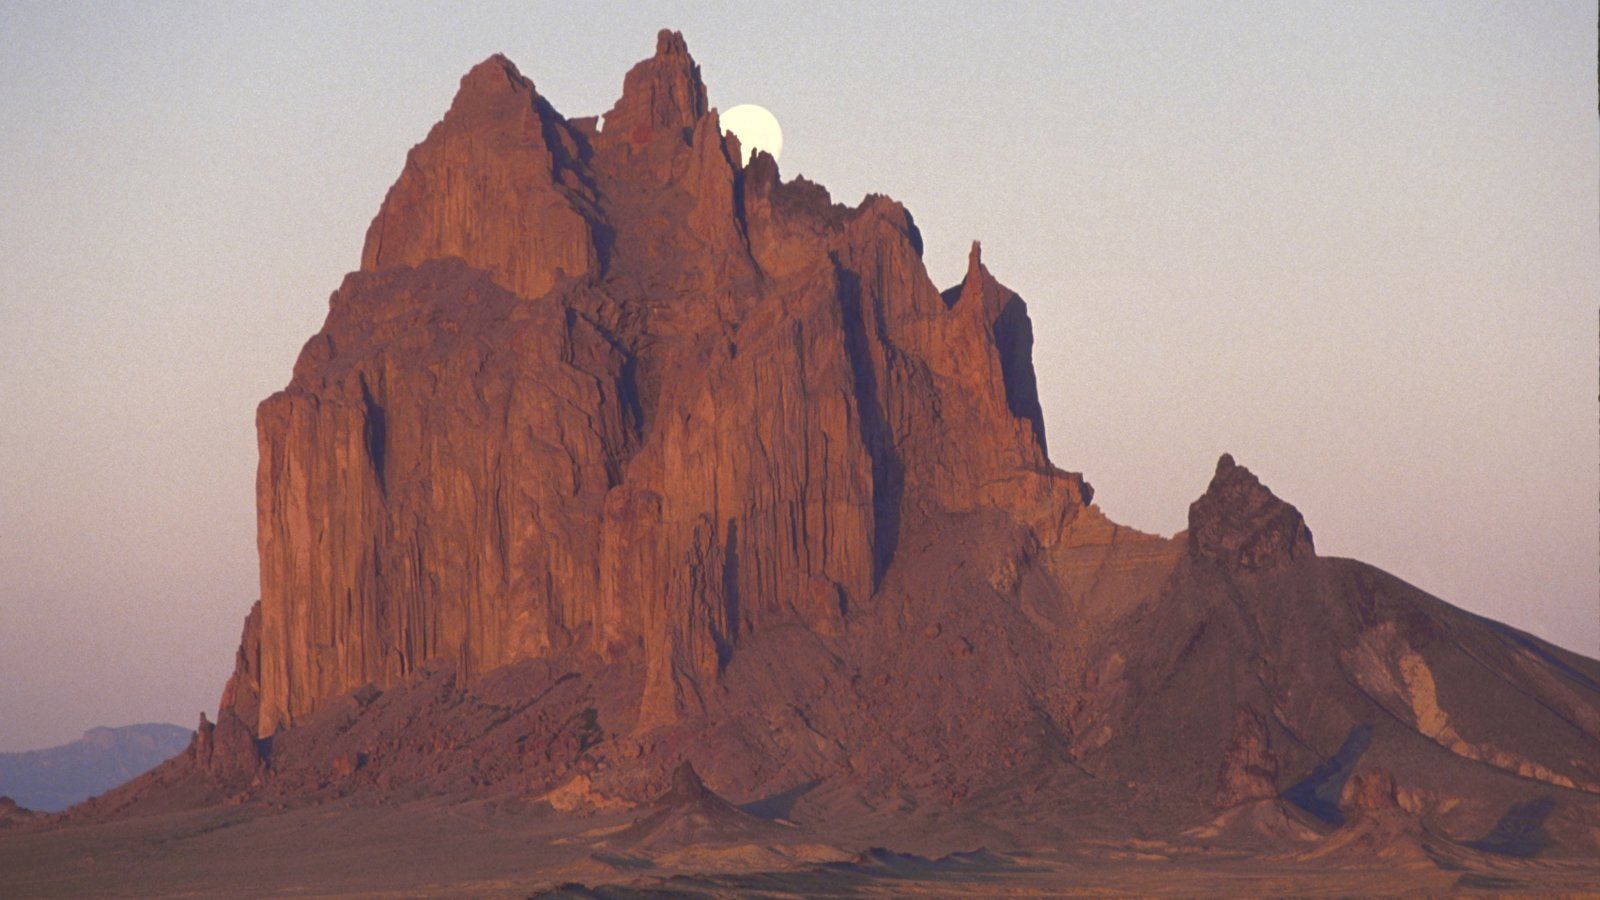 Shiprock rock formation Picture: View Photo & Image of Shiprock